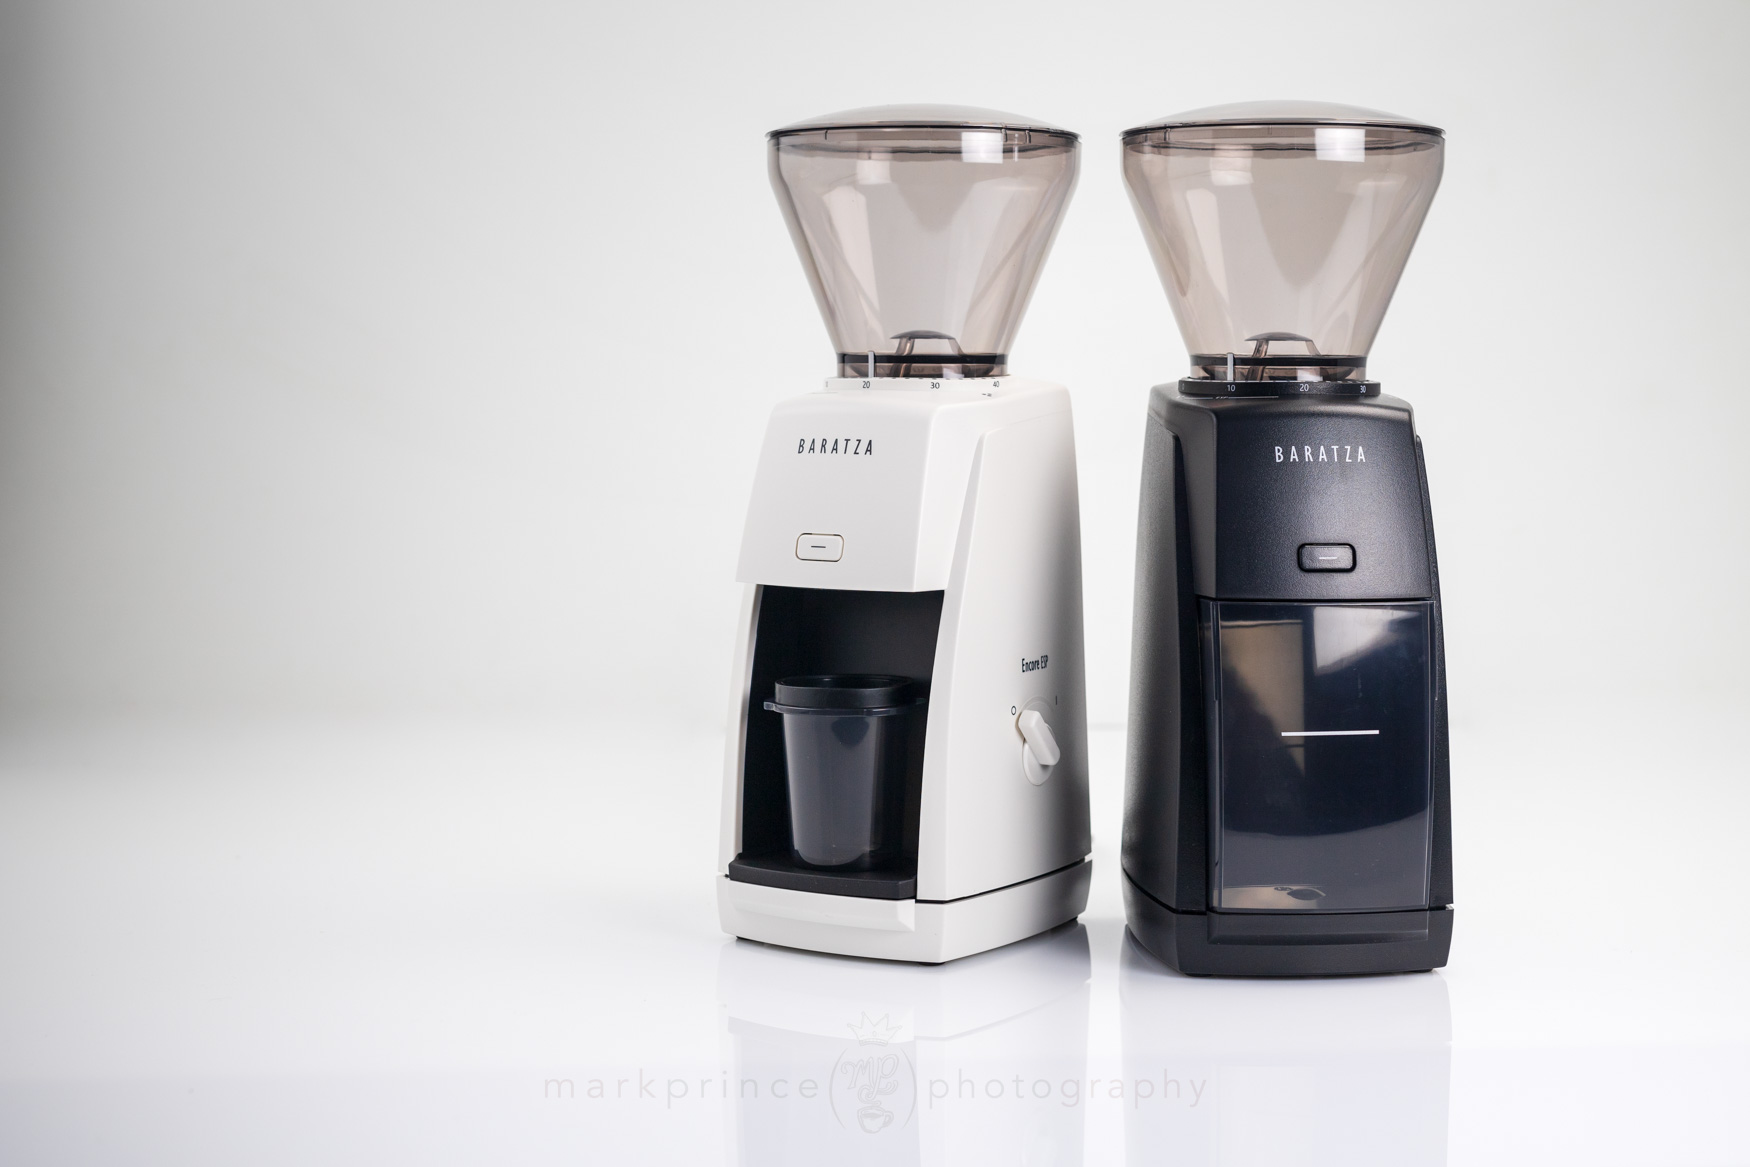 Best bean-to-cup machine out of Beko, Breville, and Aeropress